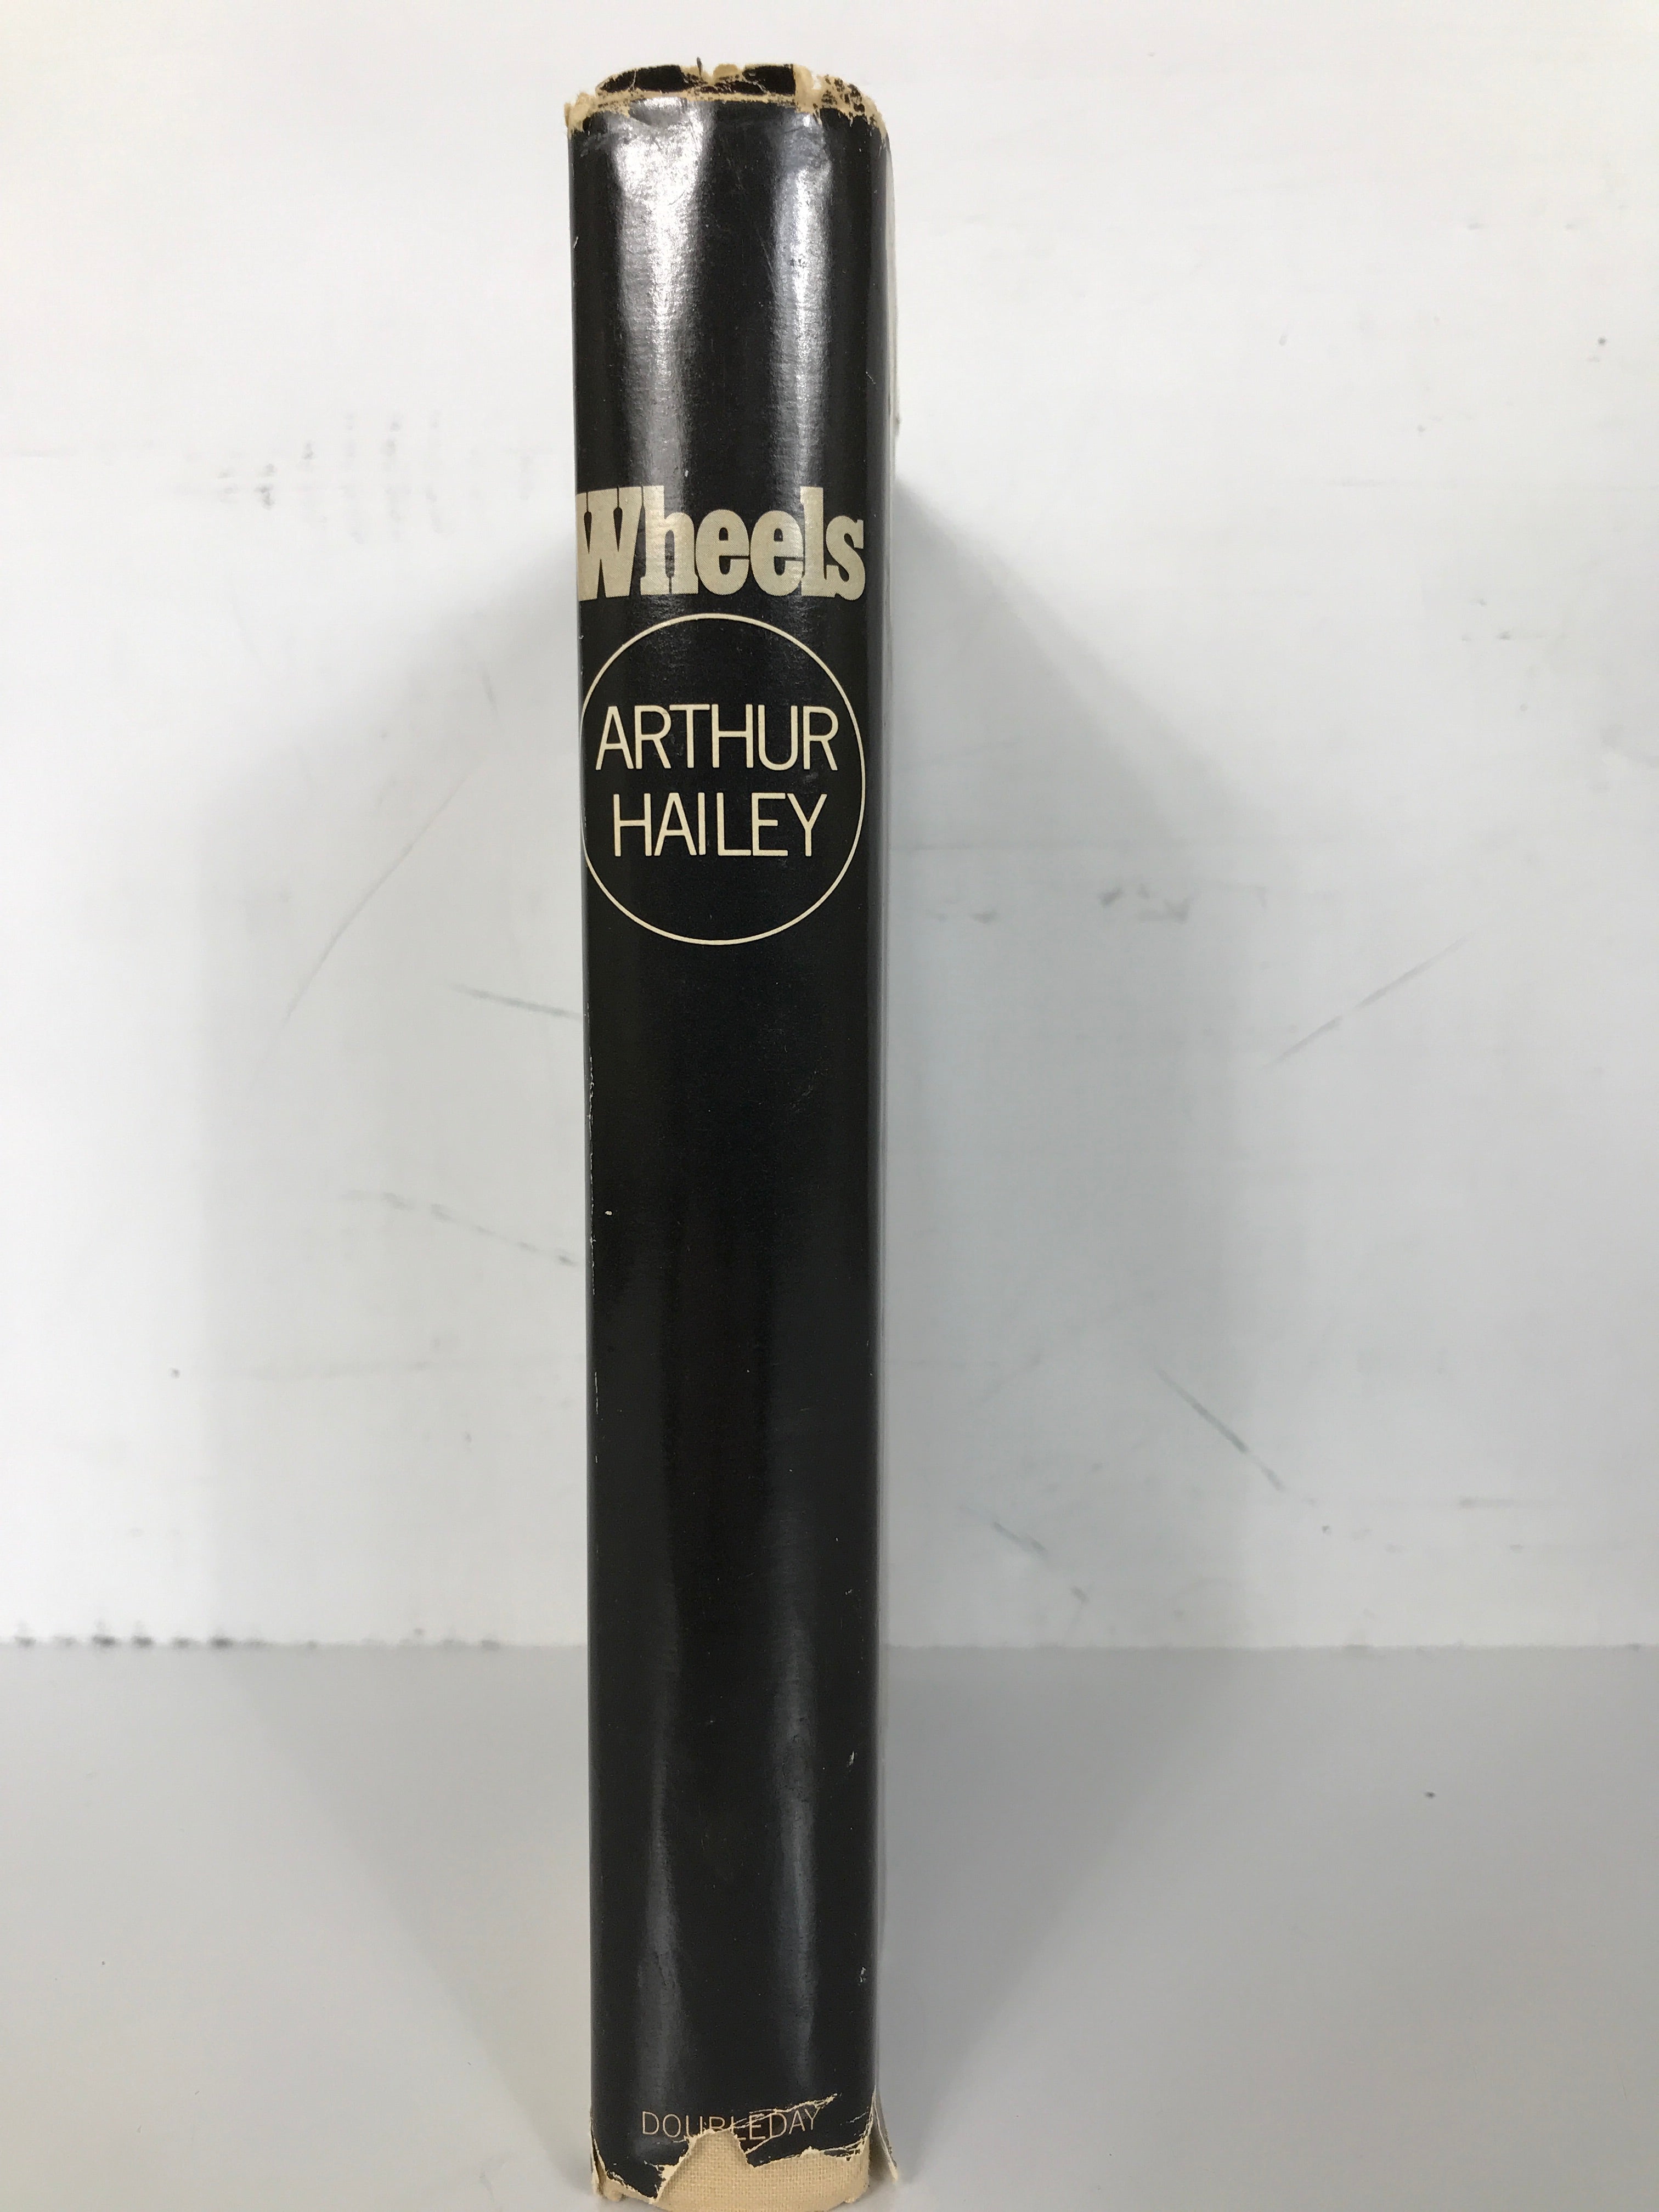 Wheels by Arthur Hailey 1971 Stated First Edition HC DJ